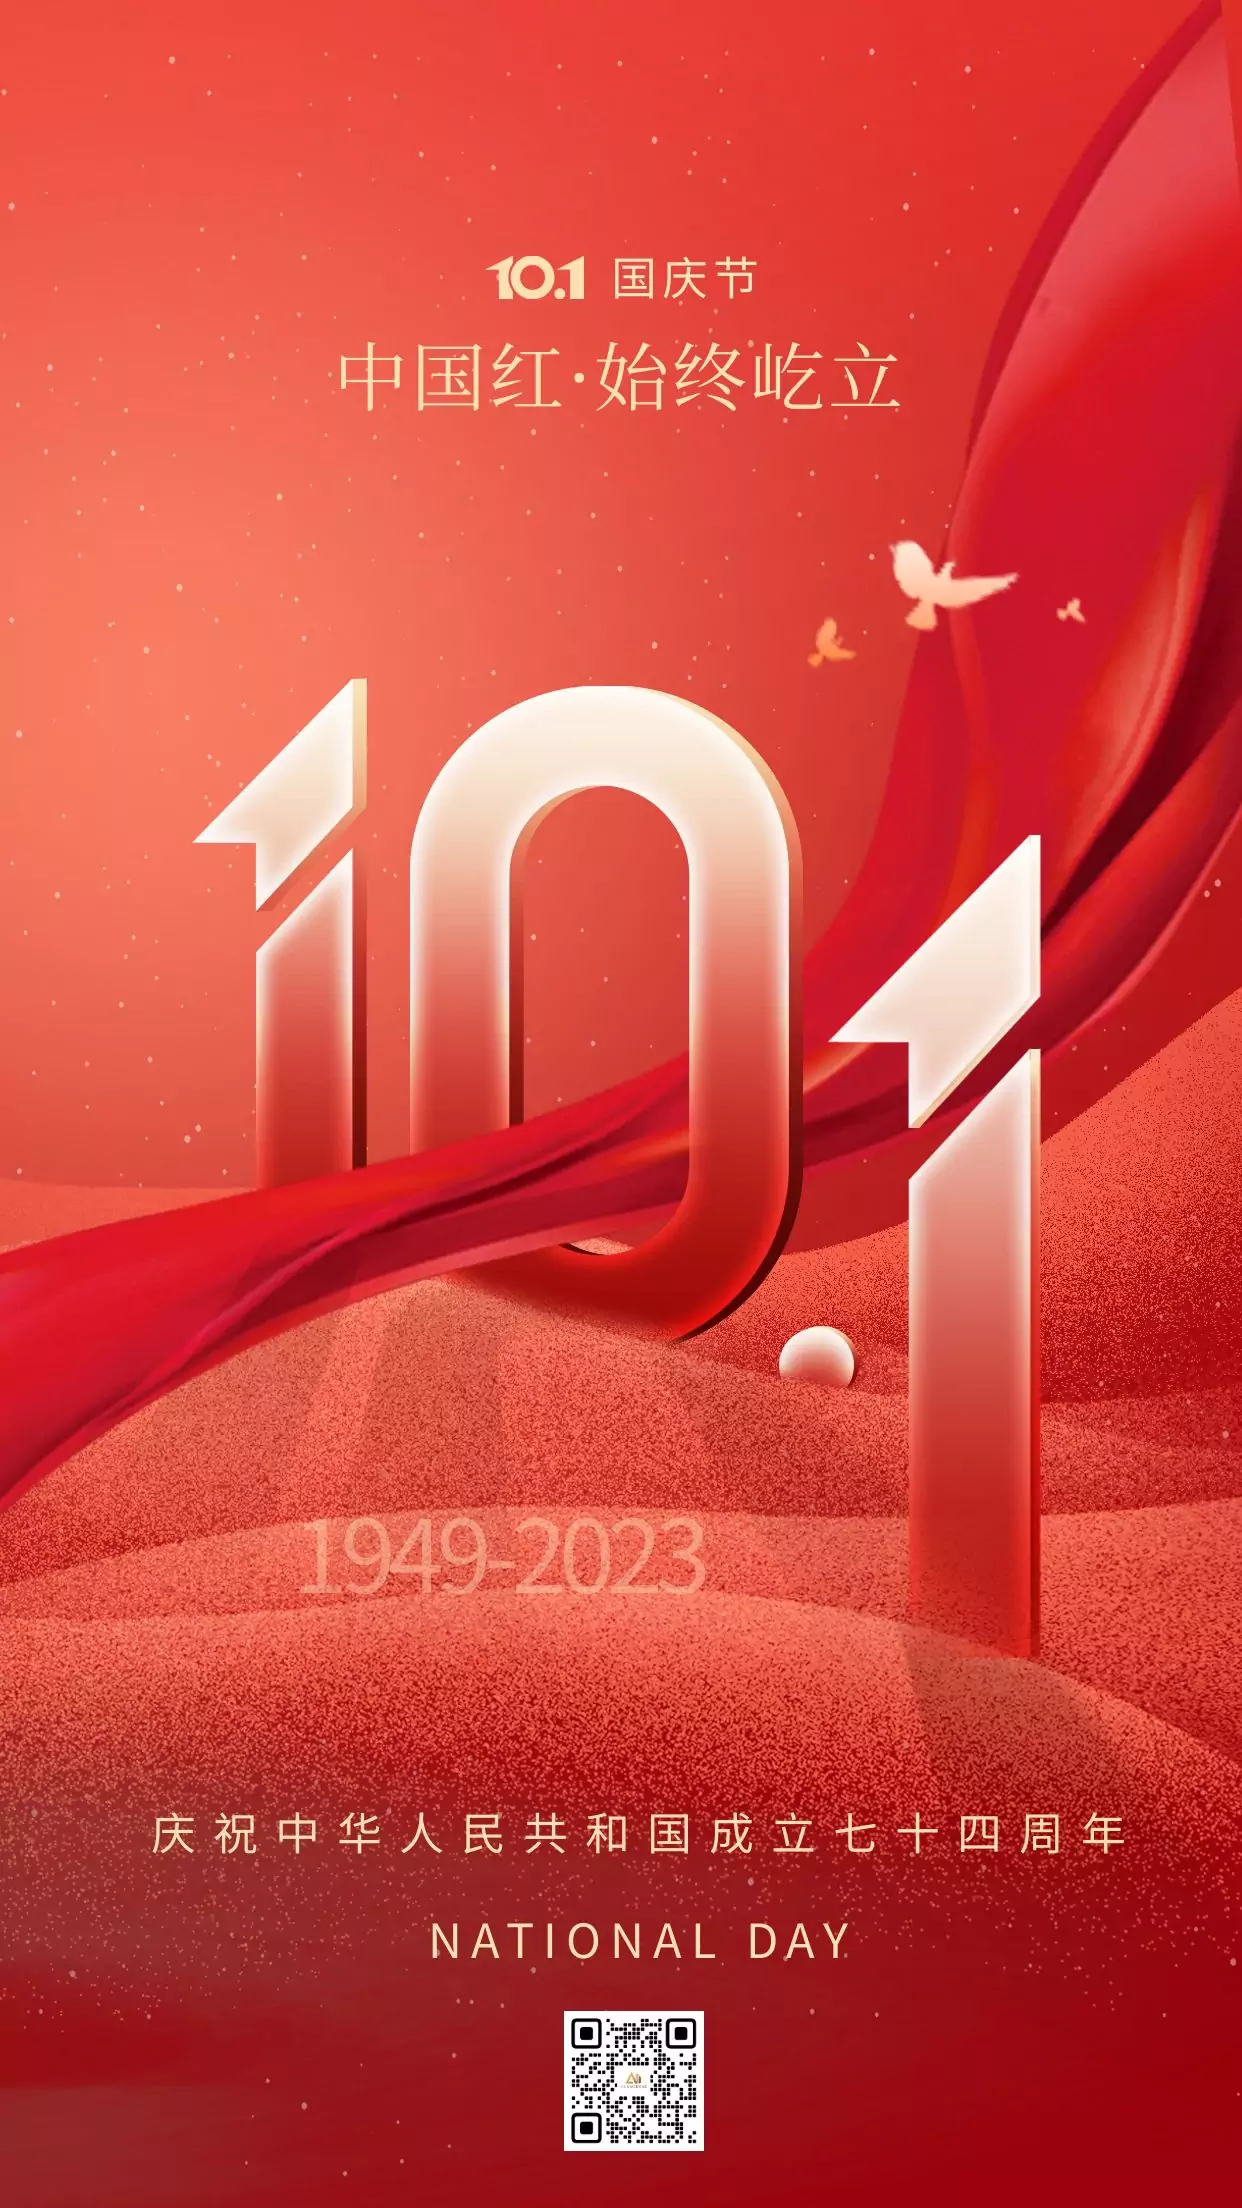 Chinese National Day inform from Alumideas